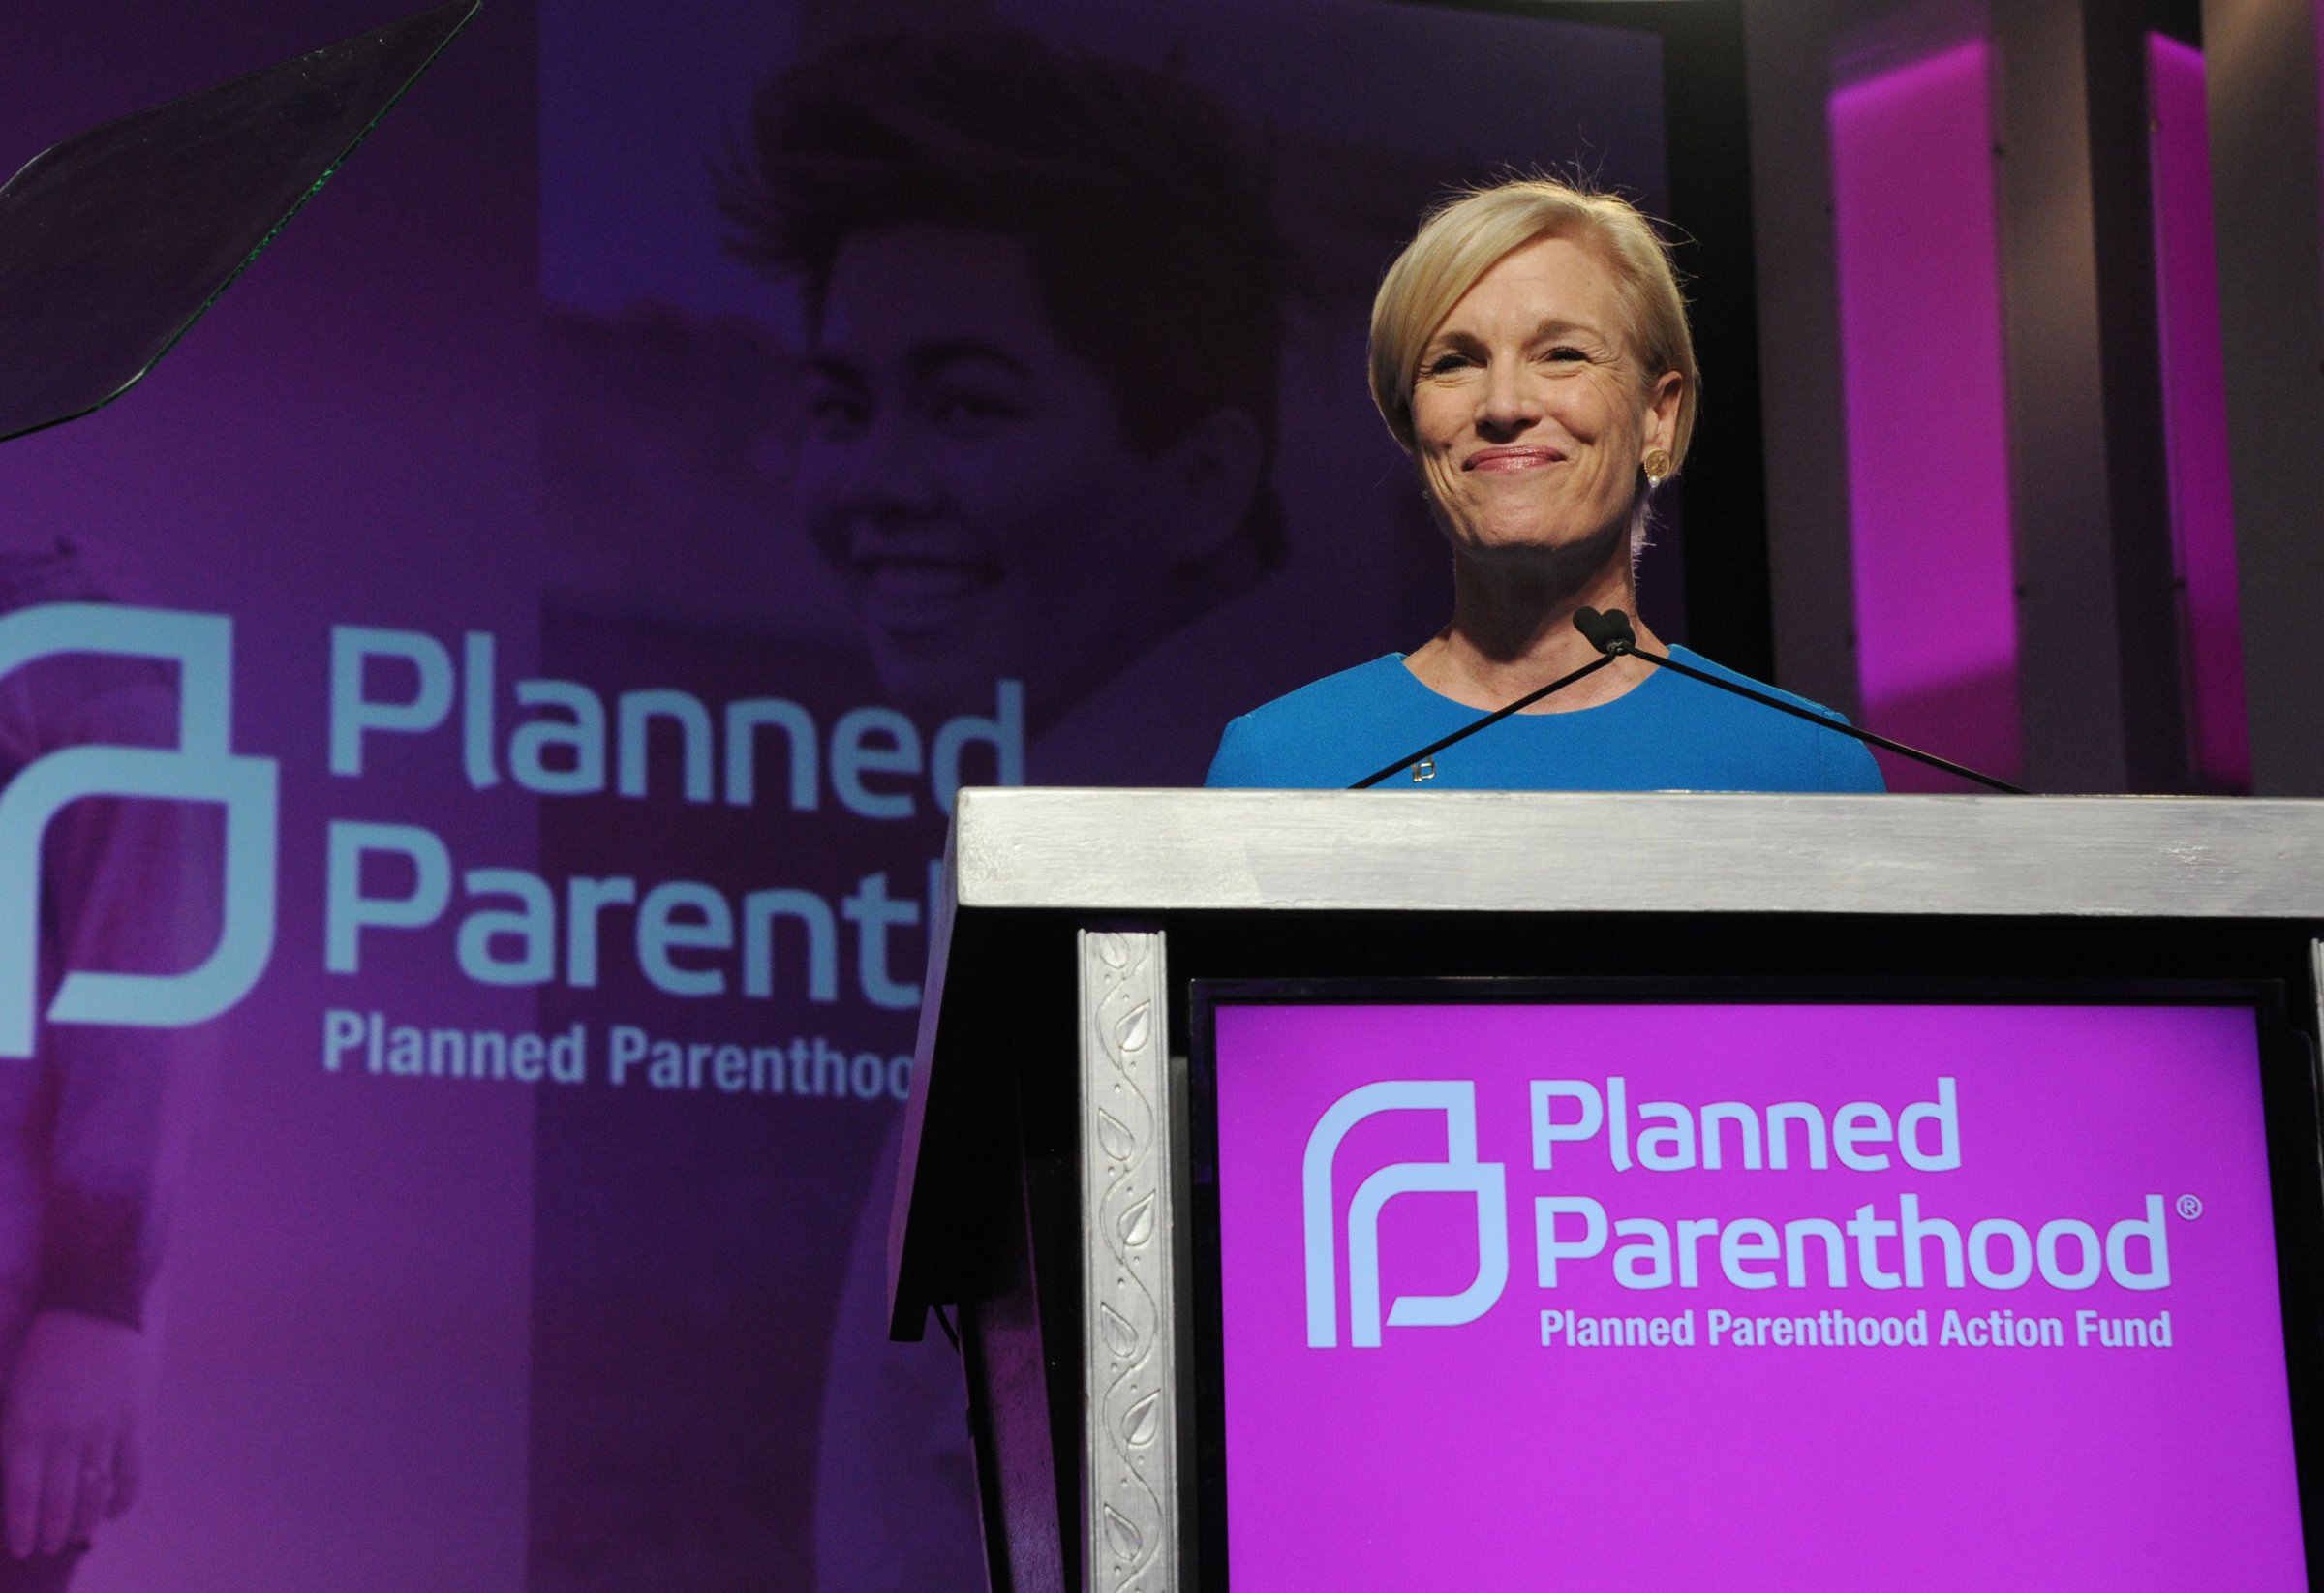 President and CEO Planned Parenthood Cecile Richards onstage at the 2016 Planned Parenthood Action Fund Membership Event held during the Planned Parenthood National Convention at Washington Hilton on June 10, 2016 in Washington, DC.